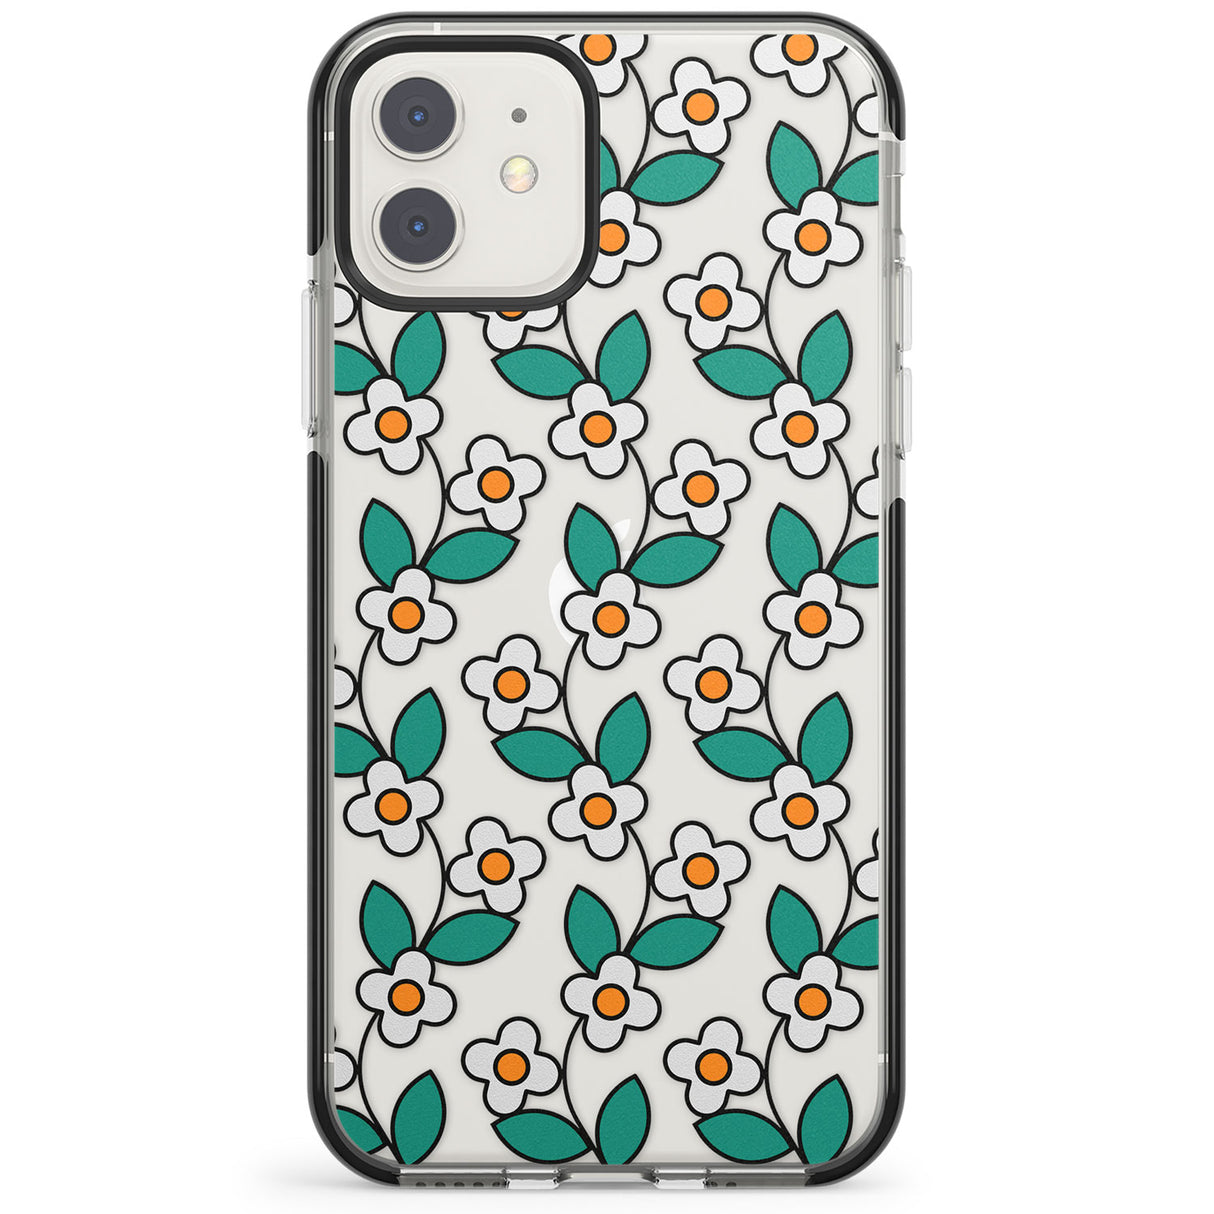 Spring Daisies Impact Phone Case for iPhone 11, iphone 12